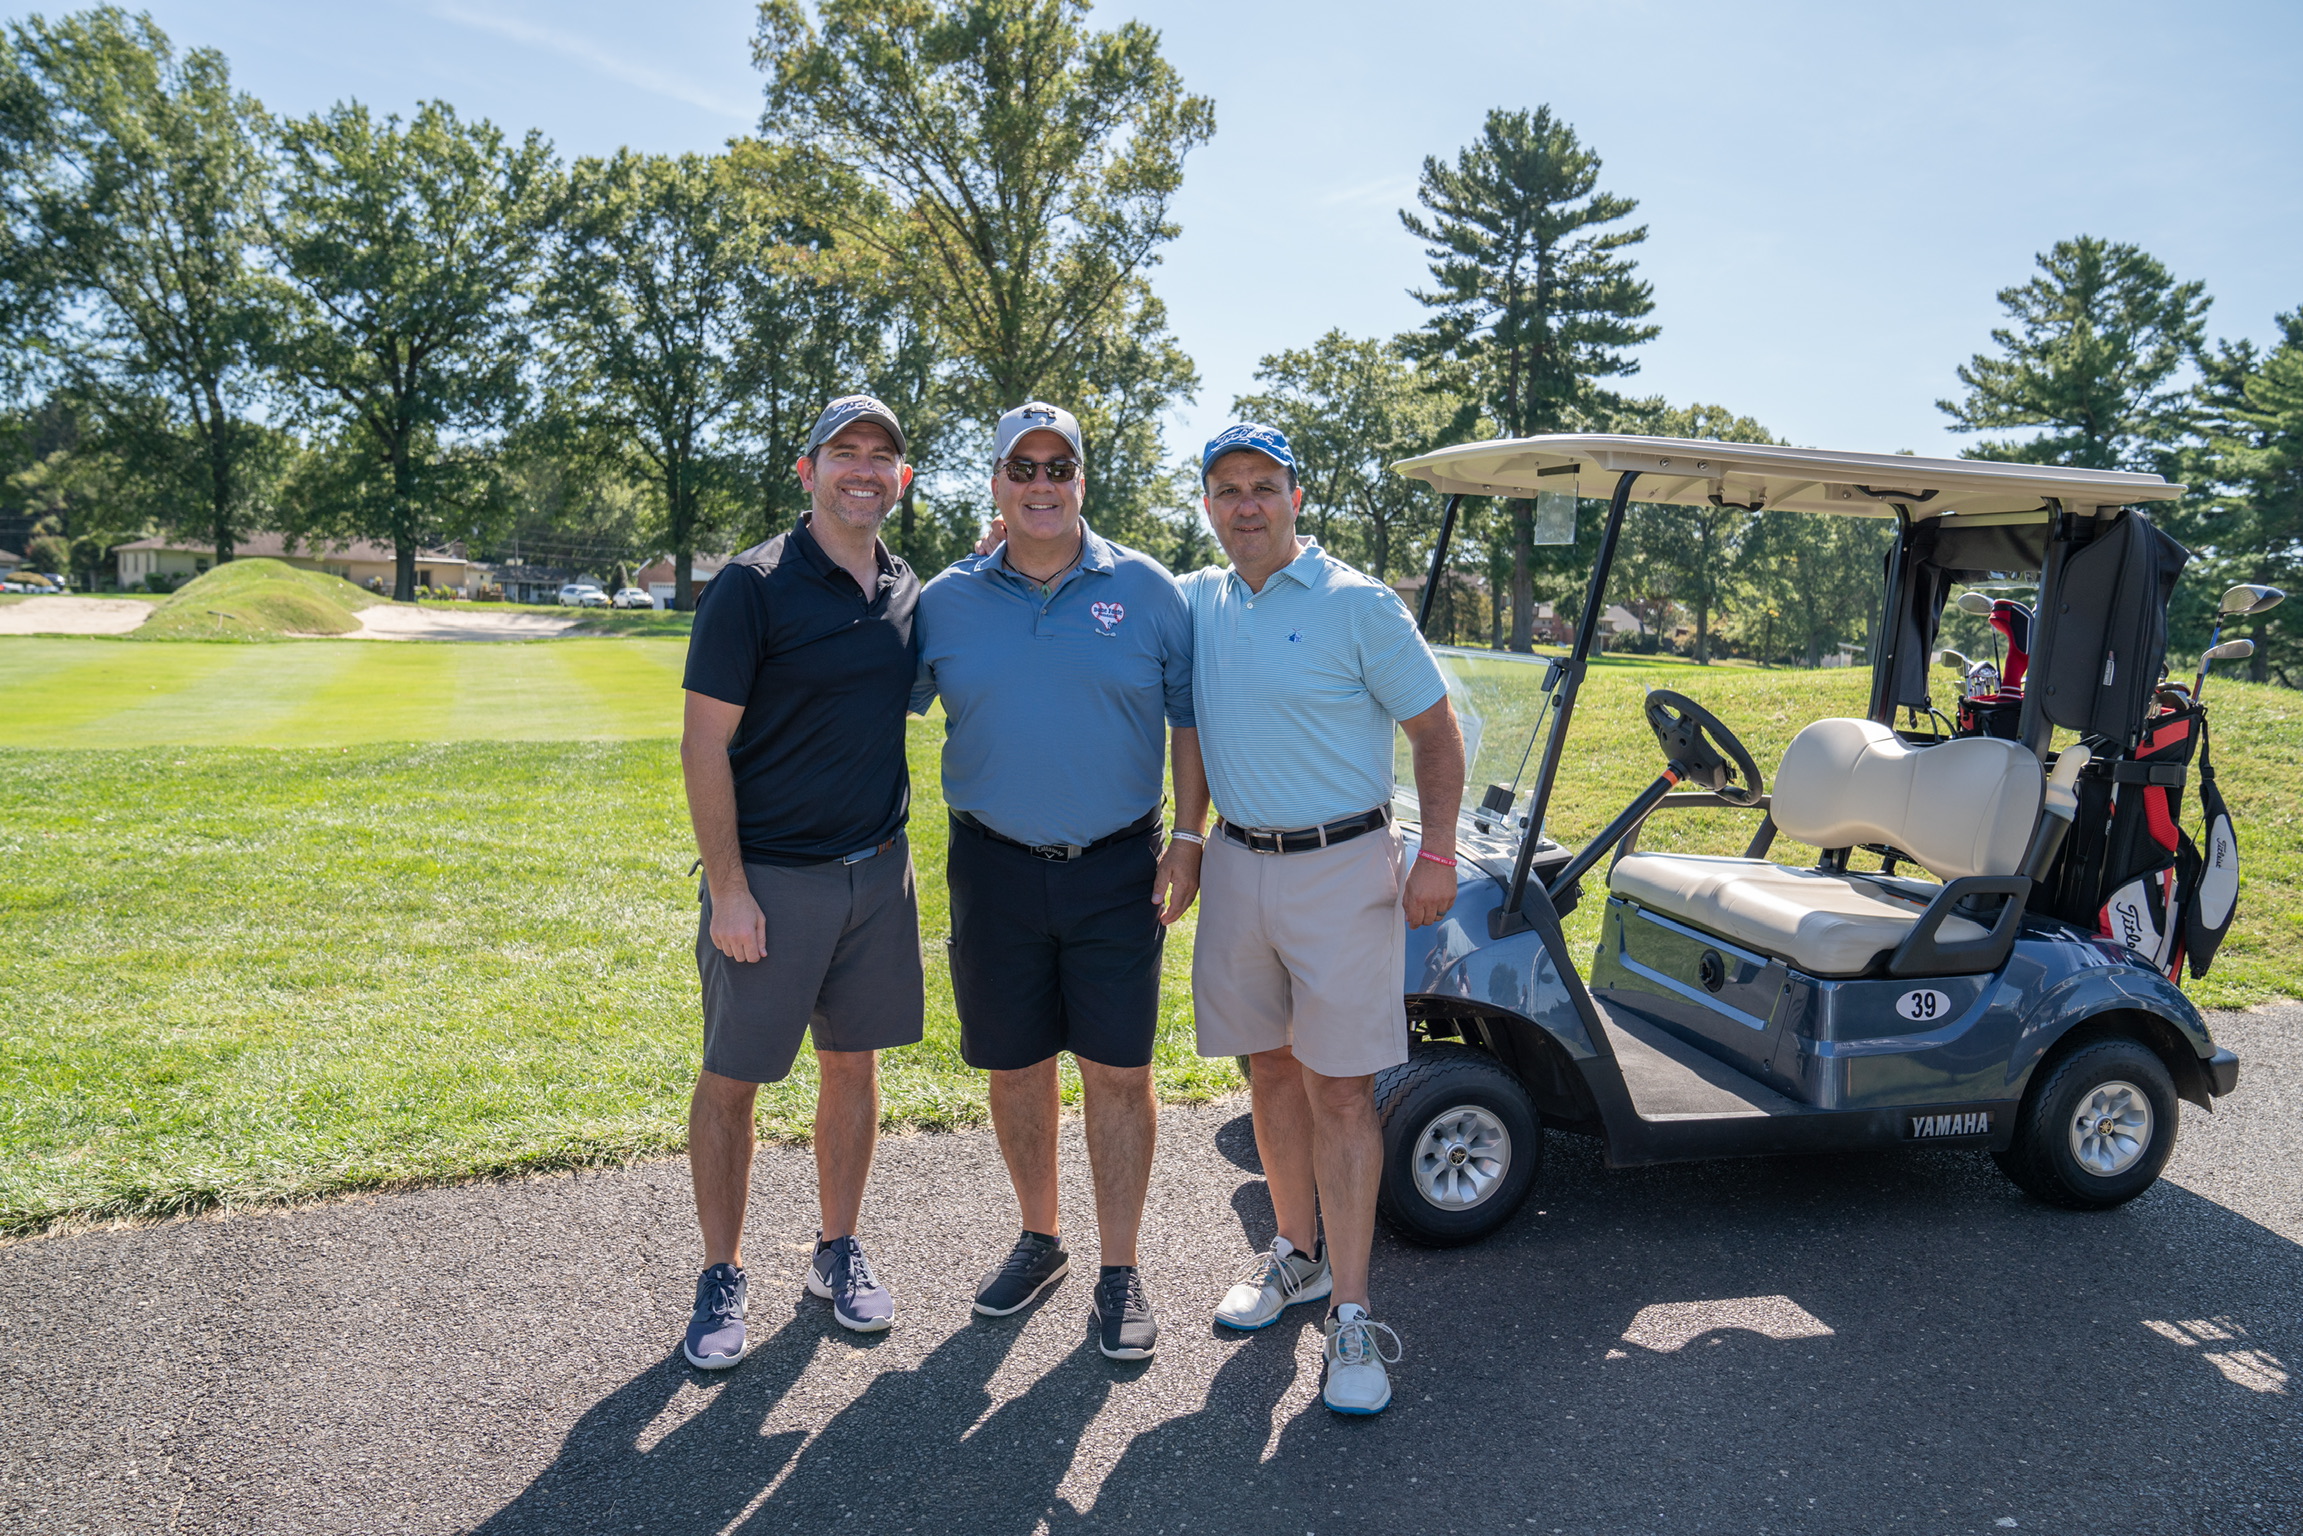 2021 Golf Outing Moving To The Next Hole